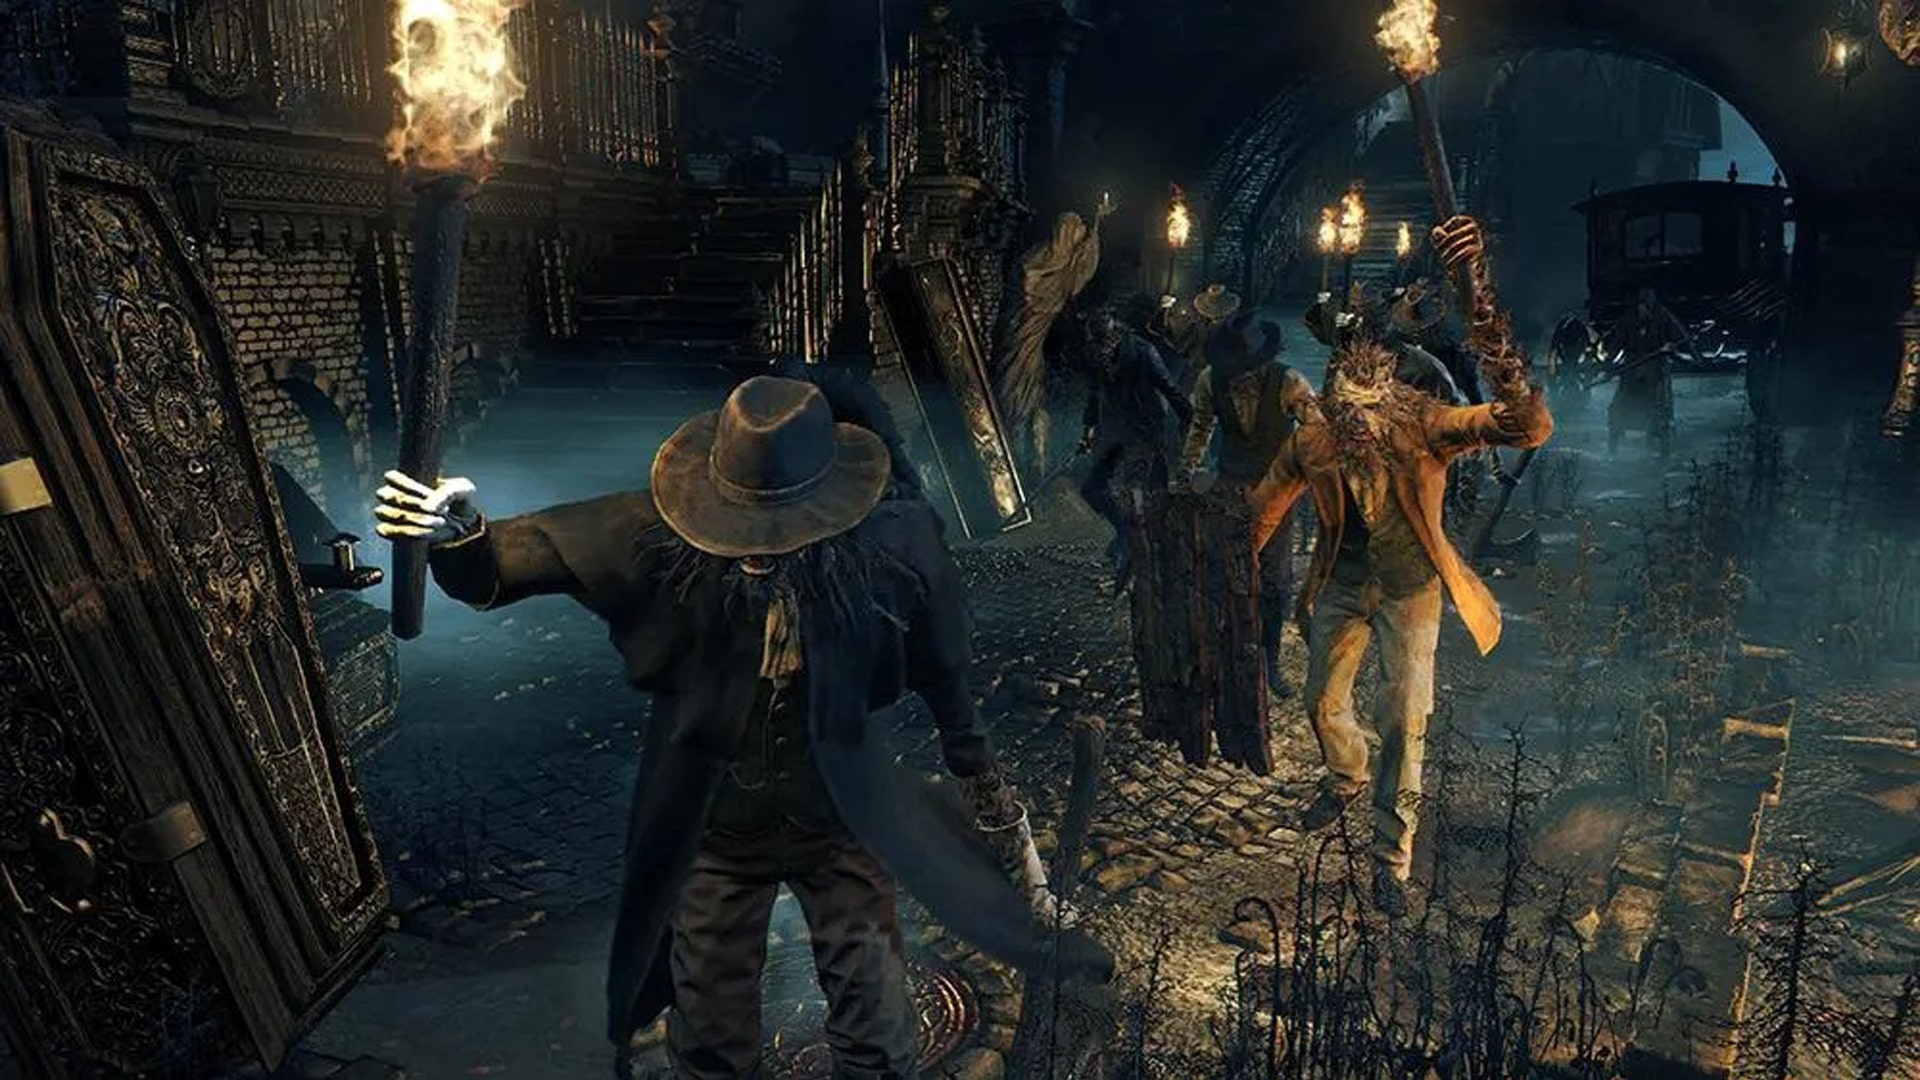 Illustration of Bloodborne's critical acclaim and legacy in the gaming industry